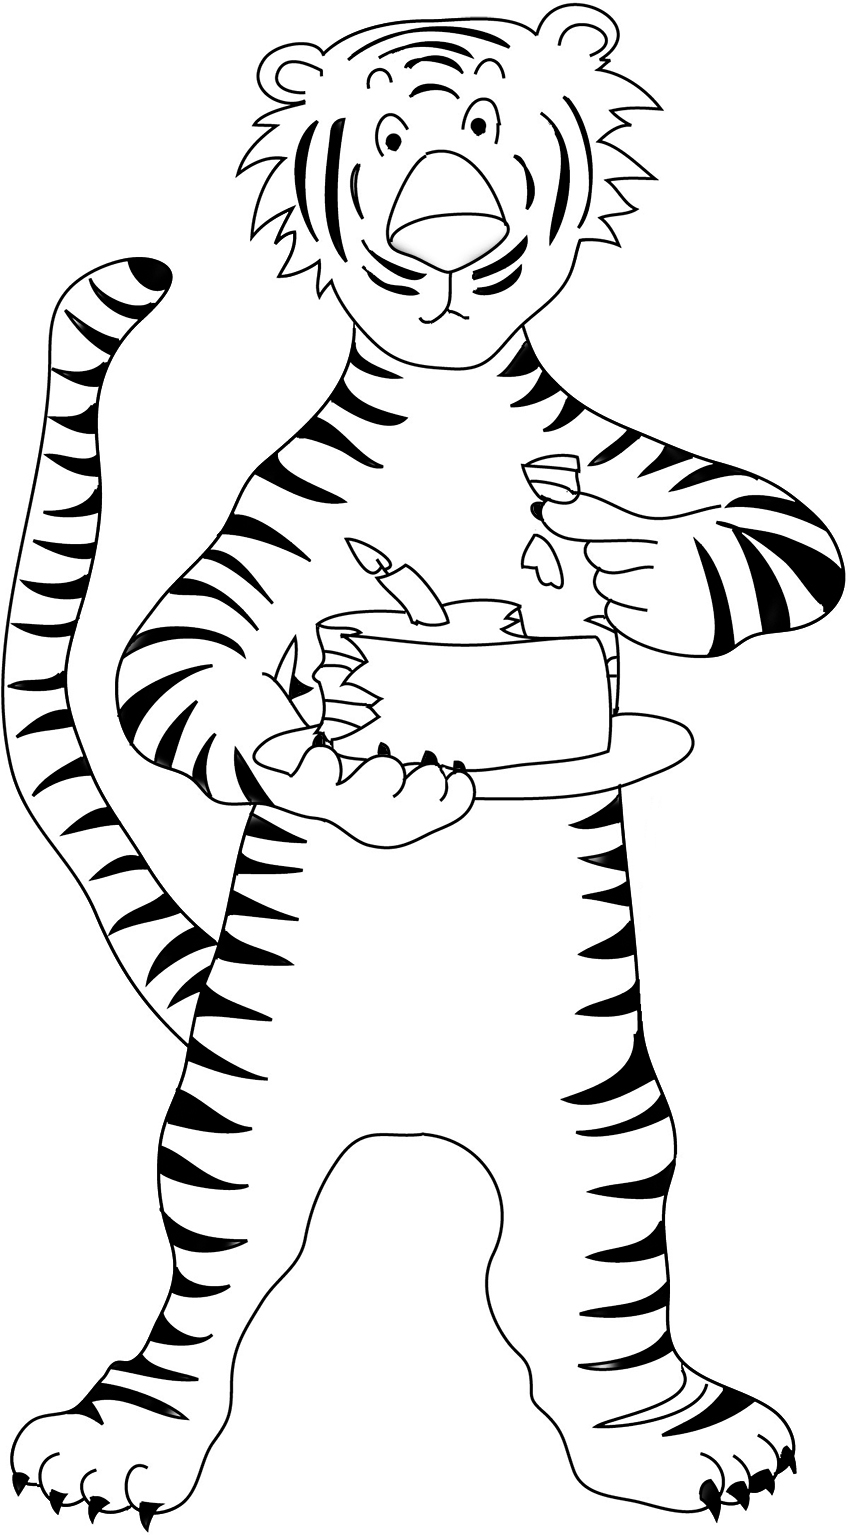 tiger coloring sheet with birthday cake